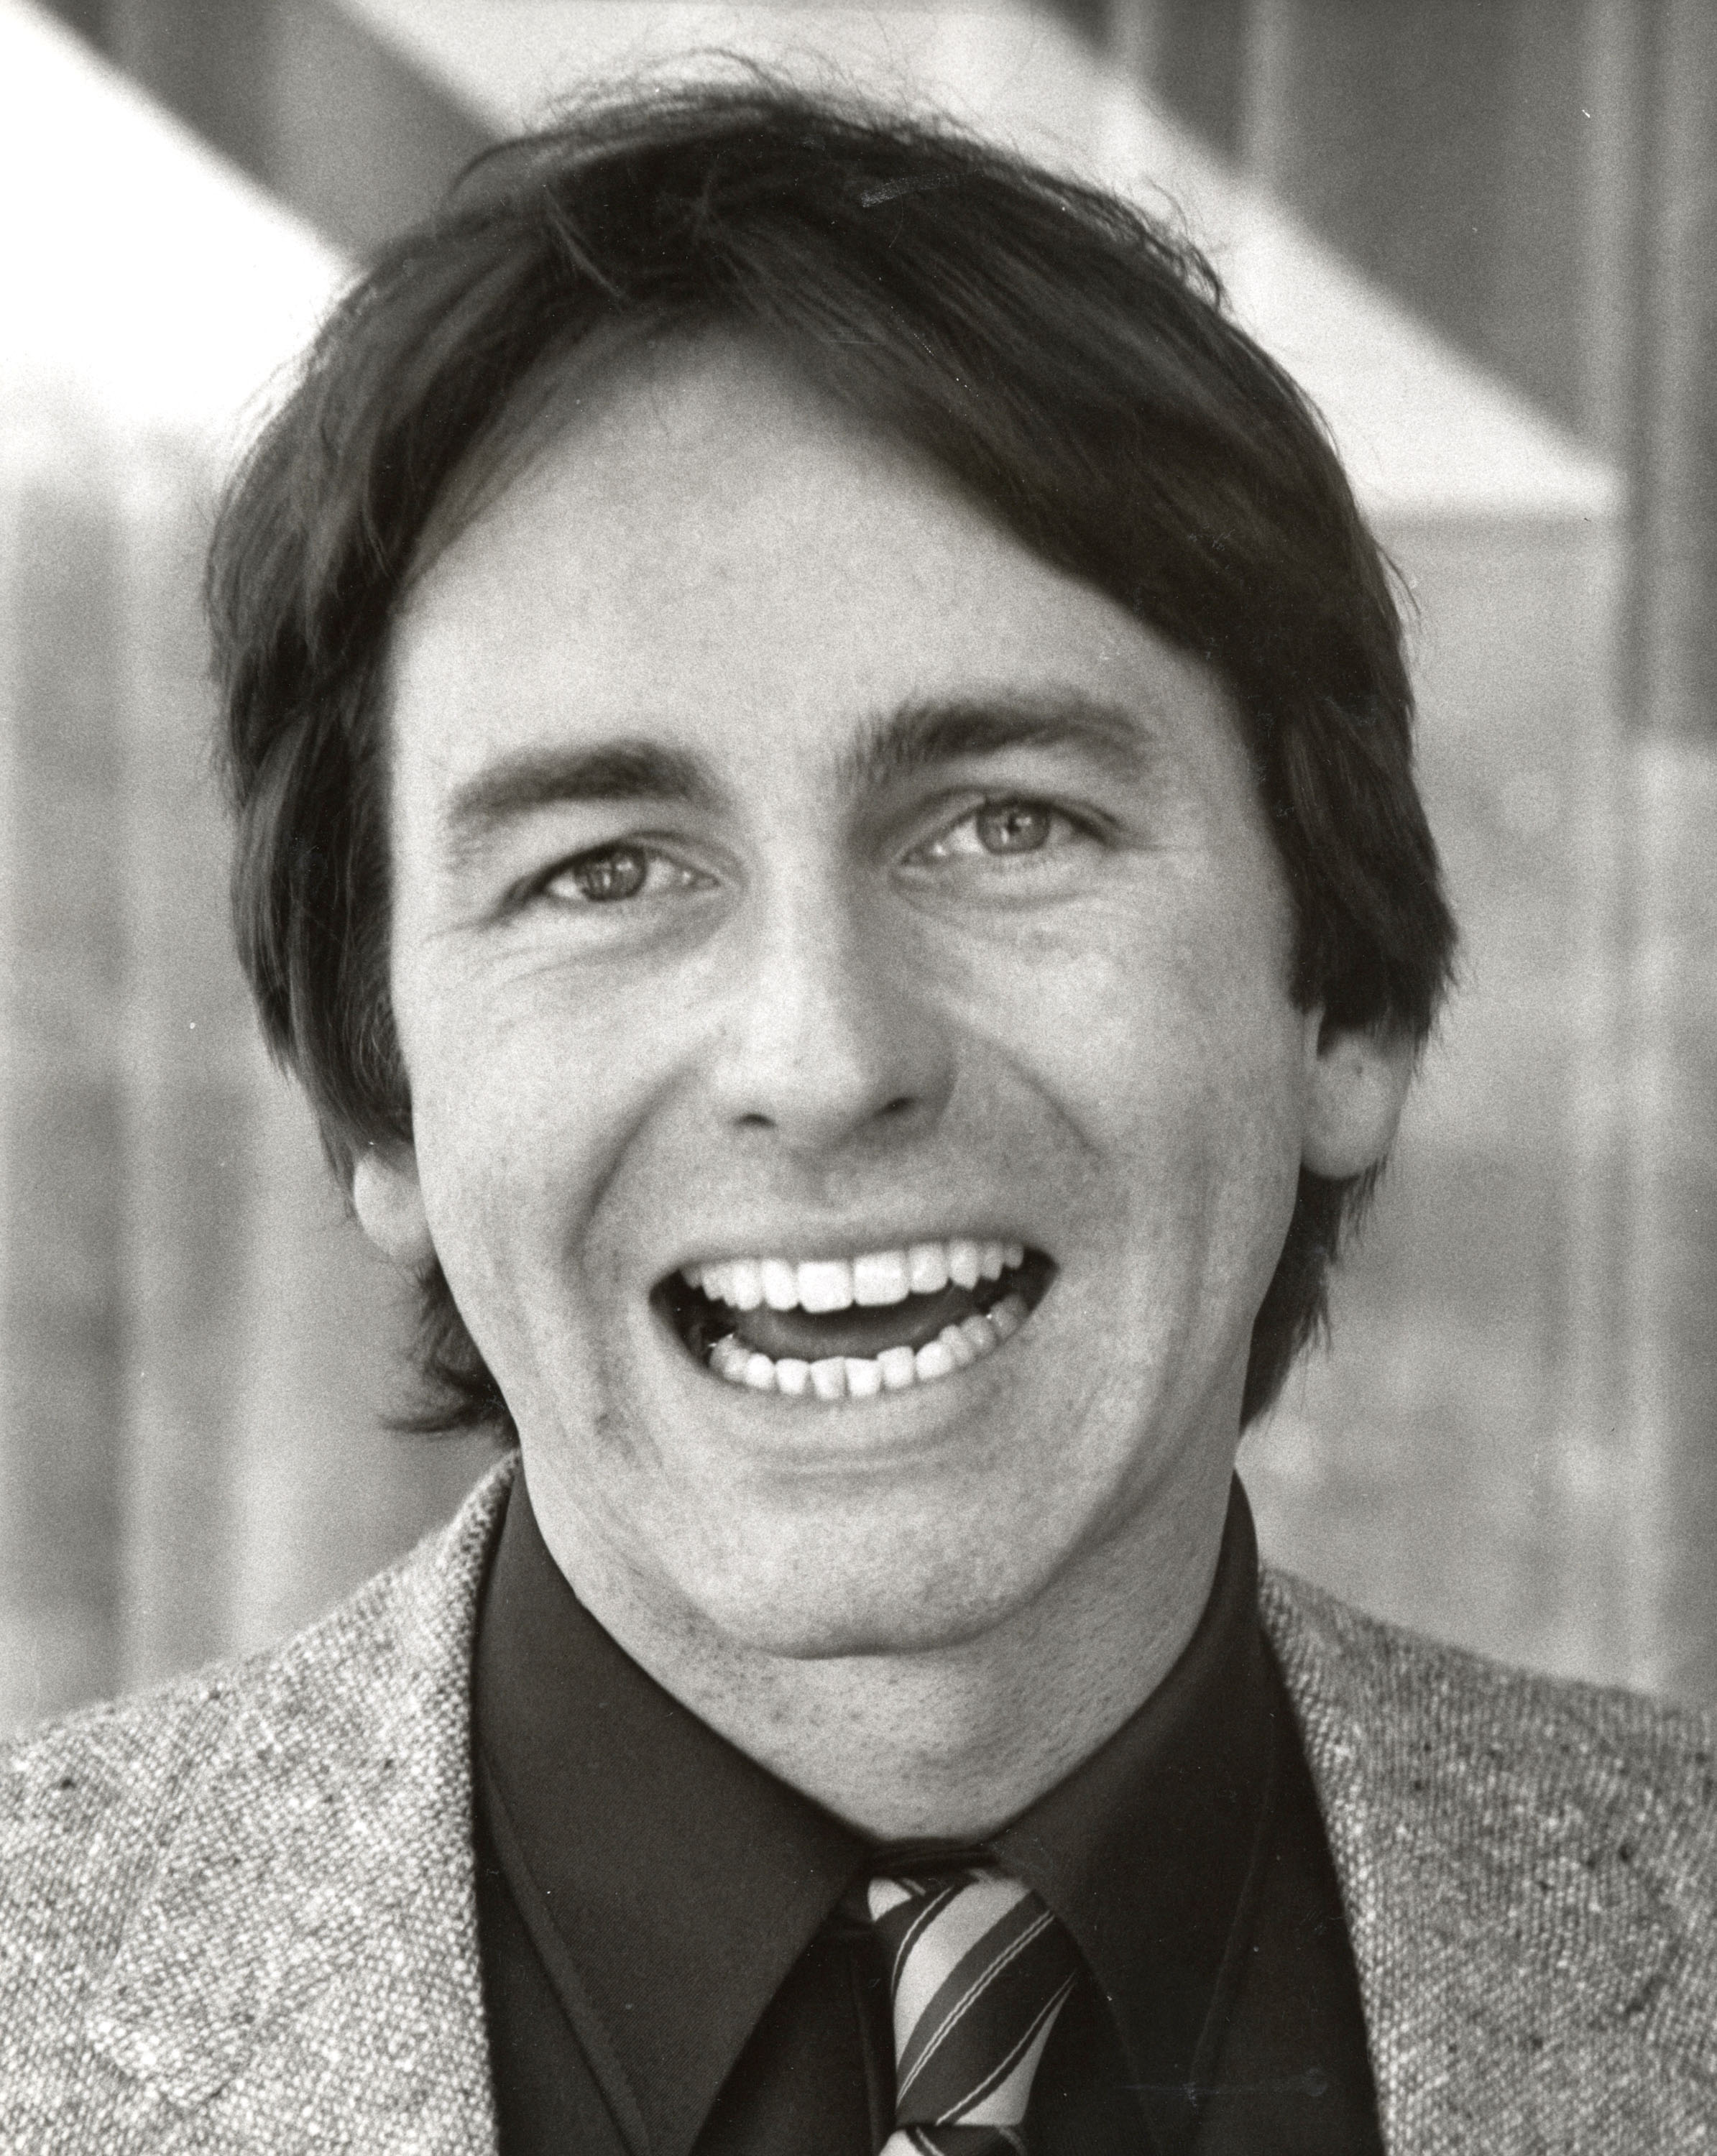 John Ritter during "Three's Company" Press Luncheon at Beverly Hills Hotel in Beverly Hills, California, United States, circa 1981 | Source: Getty Images